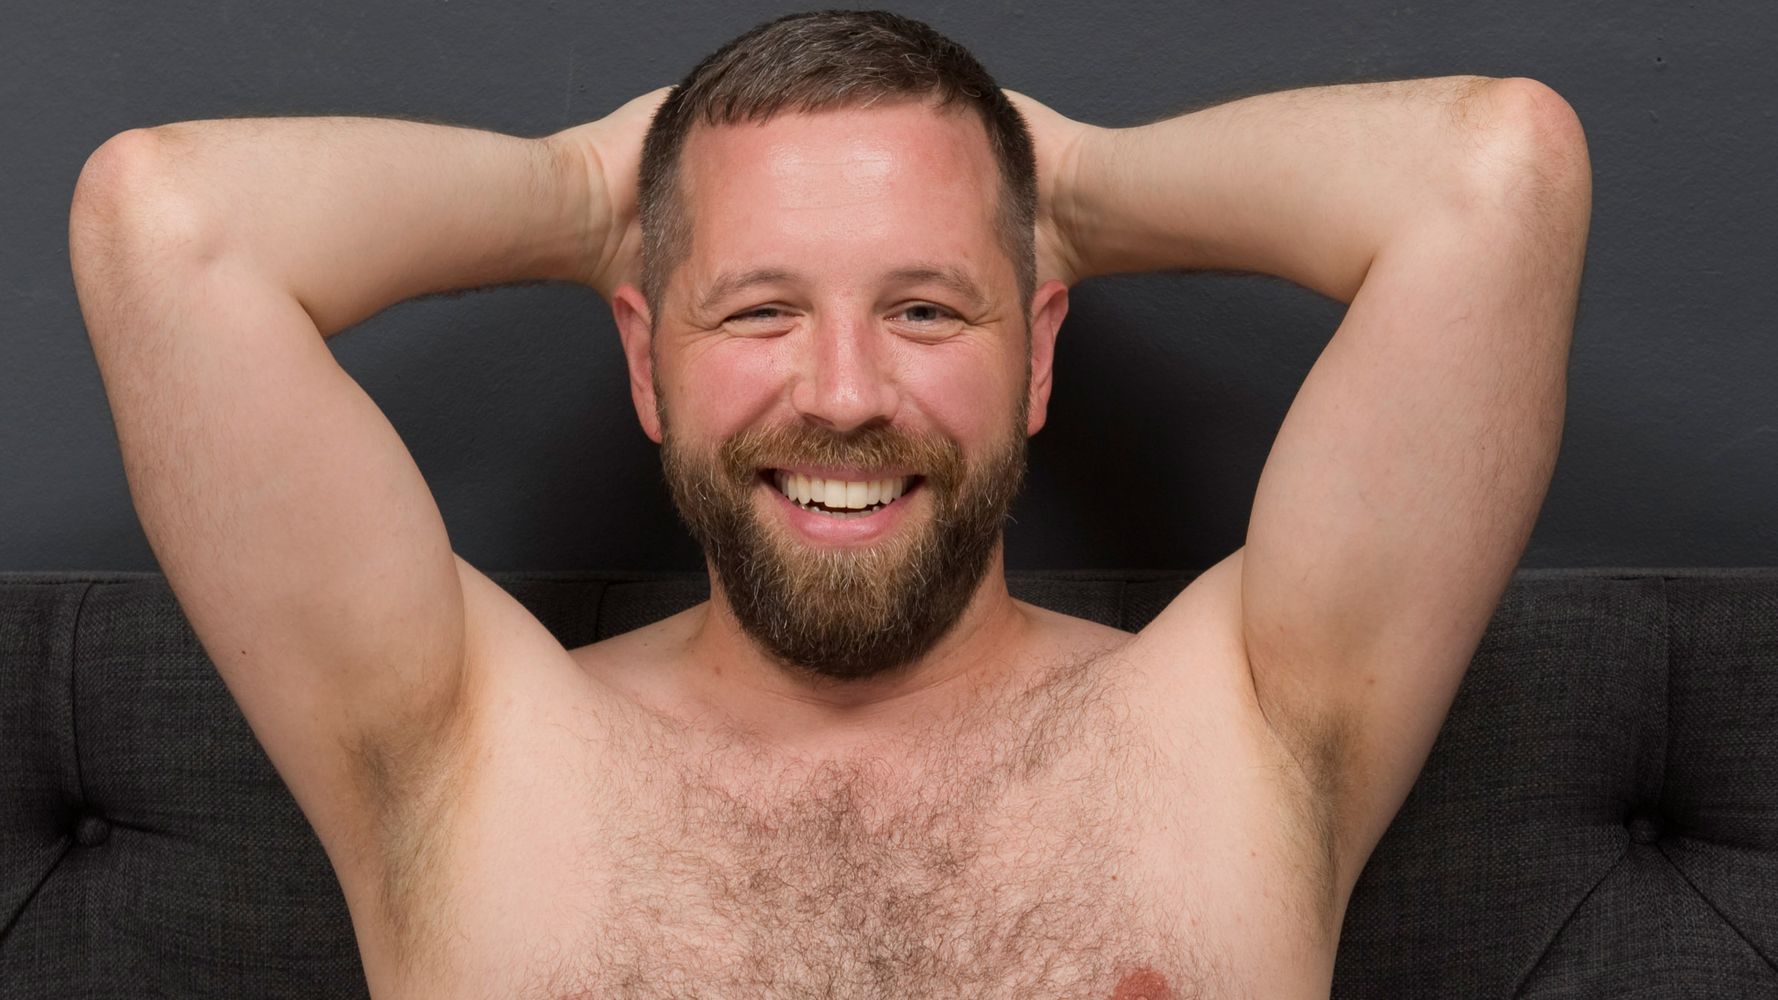 This Naked Calendar Celebrates Gay Men With 'Ordinary' Bodies | HuffPost